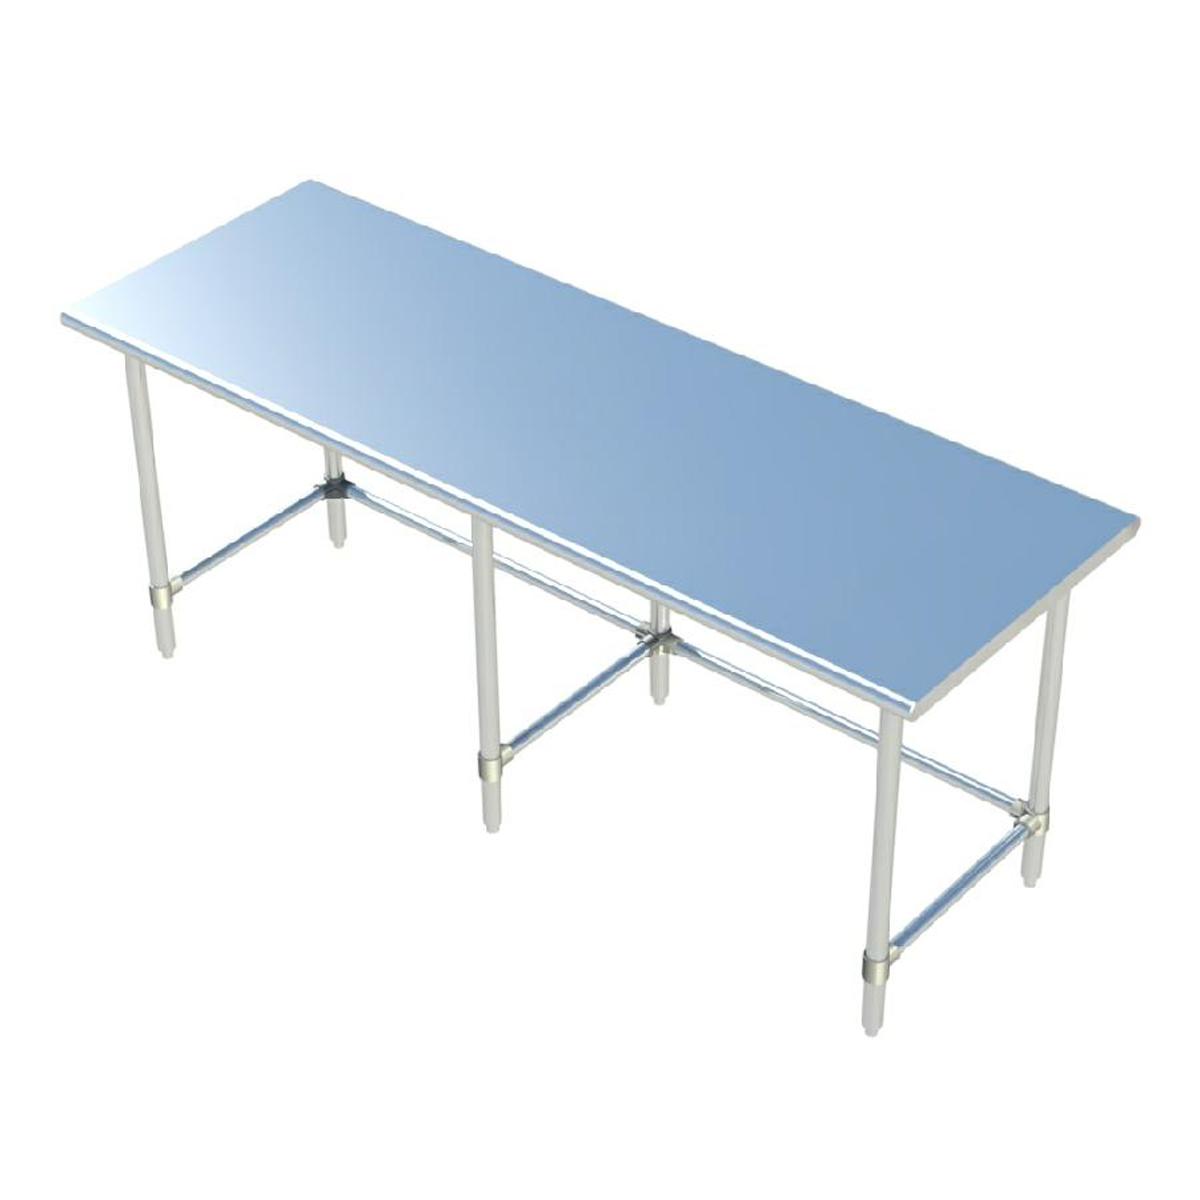 Sapphire SMTO-3084S Stainless Steel Top Work Table 84"W x 30"D